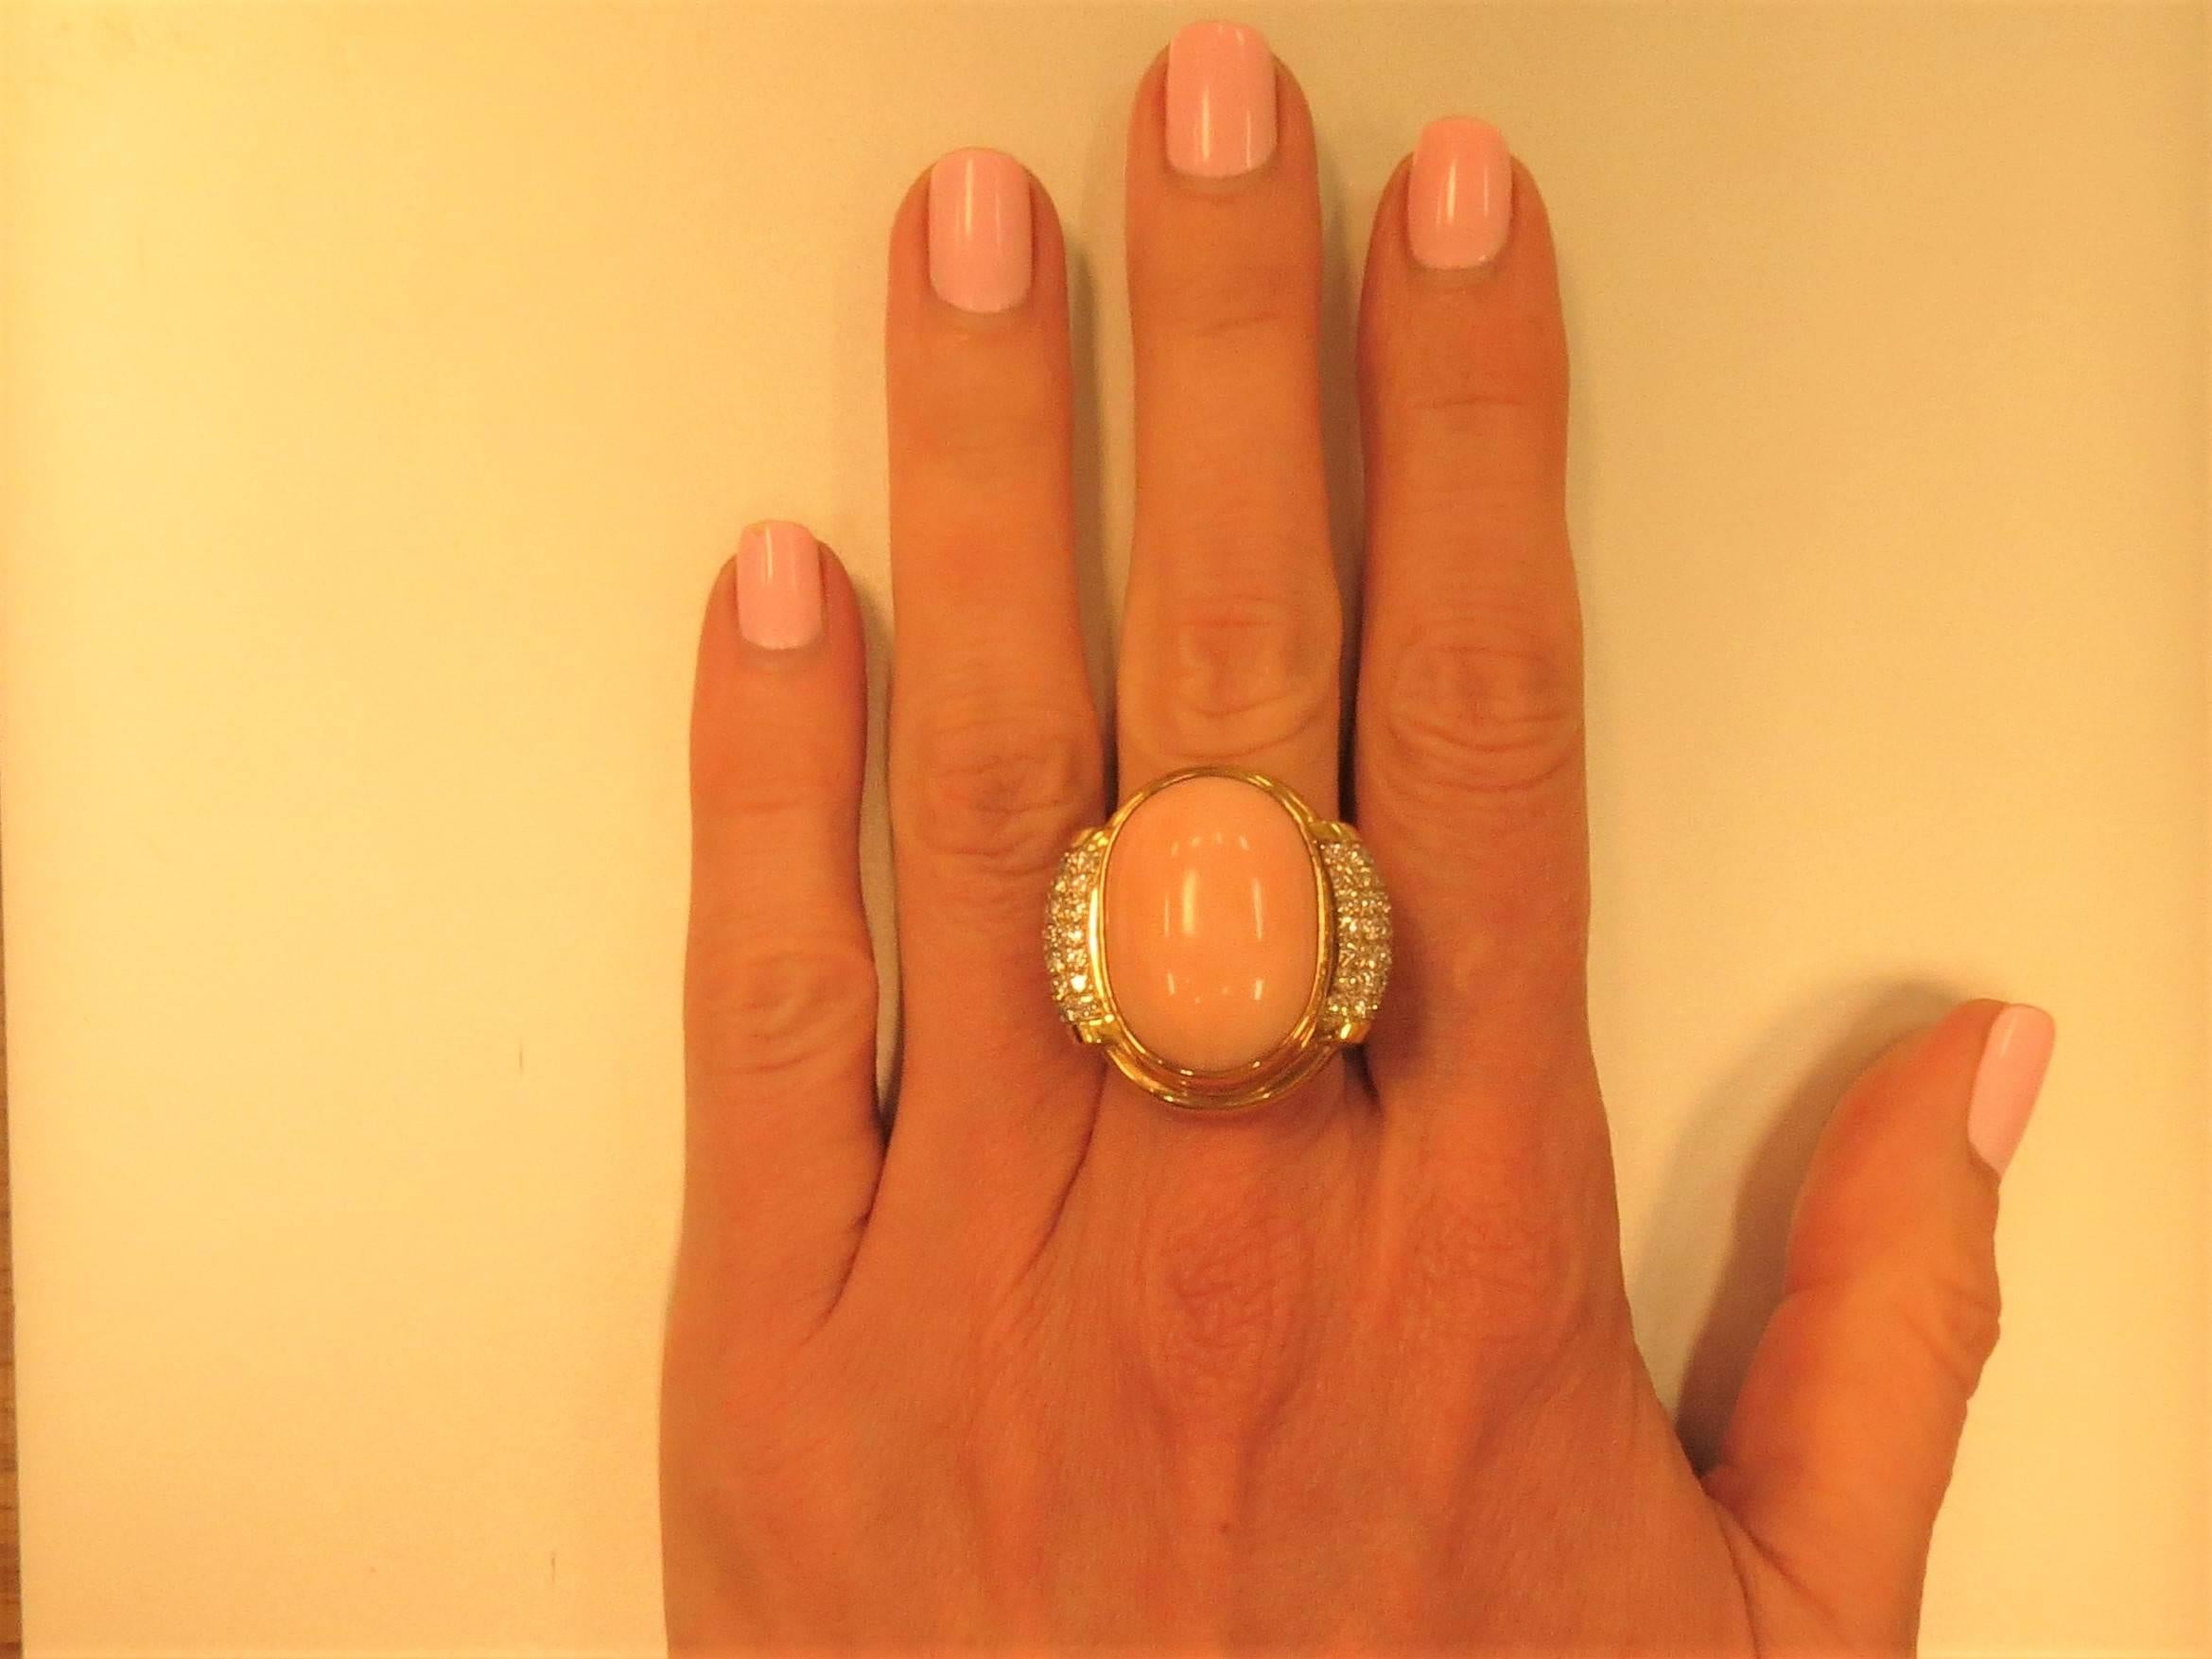 Impressive 18K yellow gold cabochon angle skin coral and diamond ring by Susan Berman, set with 33.50ct cabochon angle skin coral and 70 full cut round diamonds weighing 1.43cts, G-H color, VS clarity. 
Finger size 5, may be sized